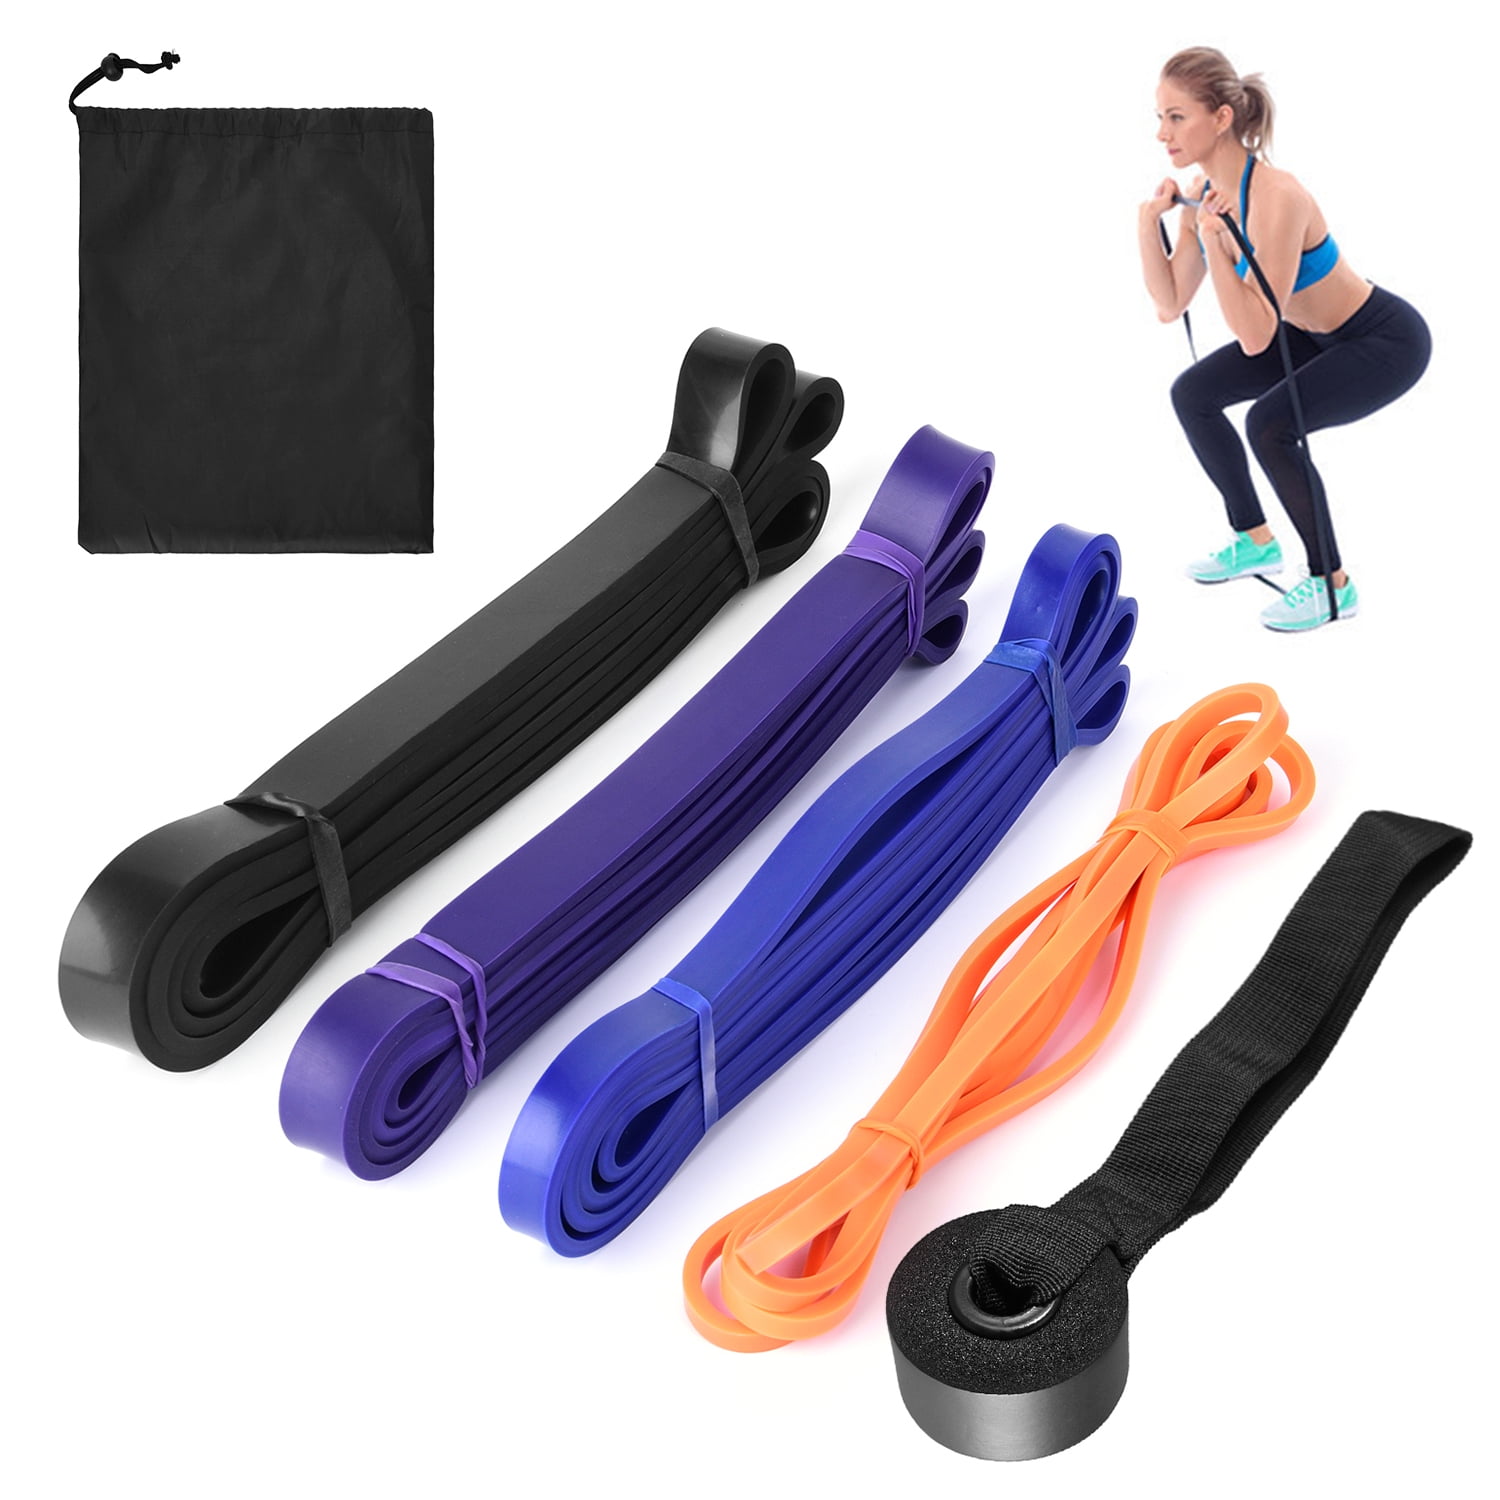 Resistance Loop Pull Exercise Gym Bands For Training Home Fitness Workout Yoga